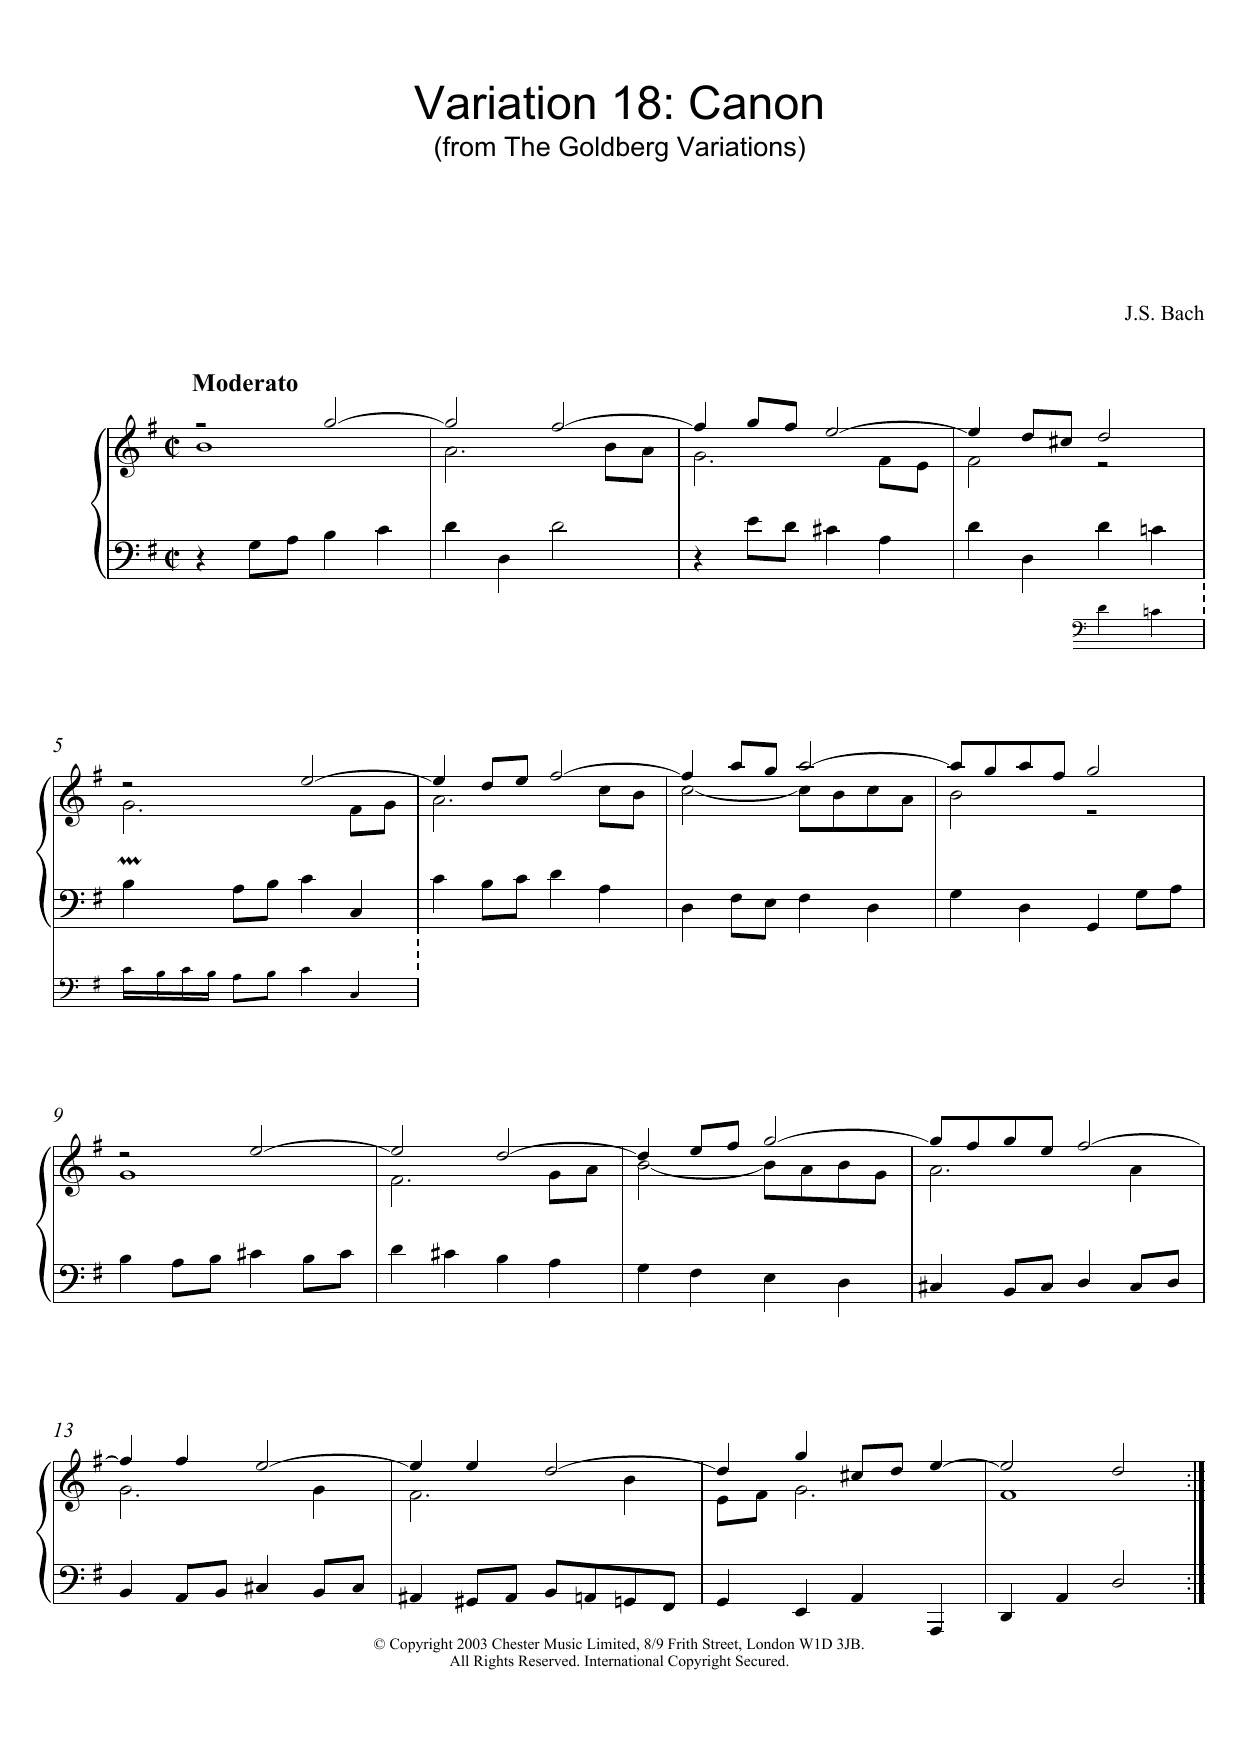 J.S. Bach Variation 18: Canon (from The Goldberg Variations) sheet music preview music notes and score for Piano including 2 page(s)